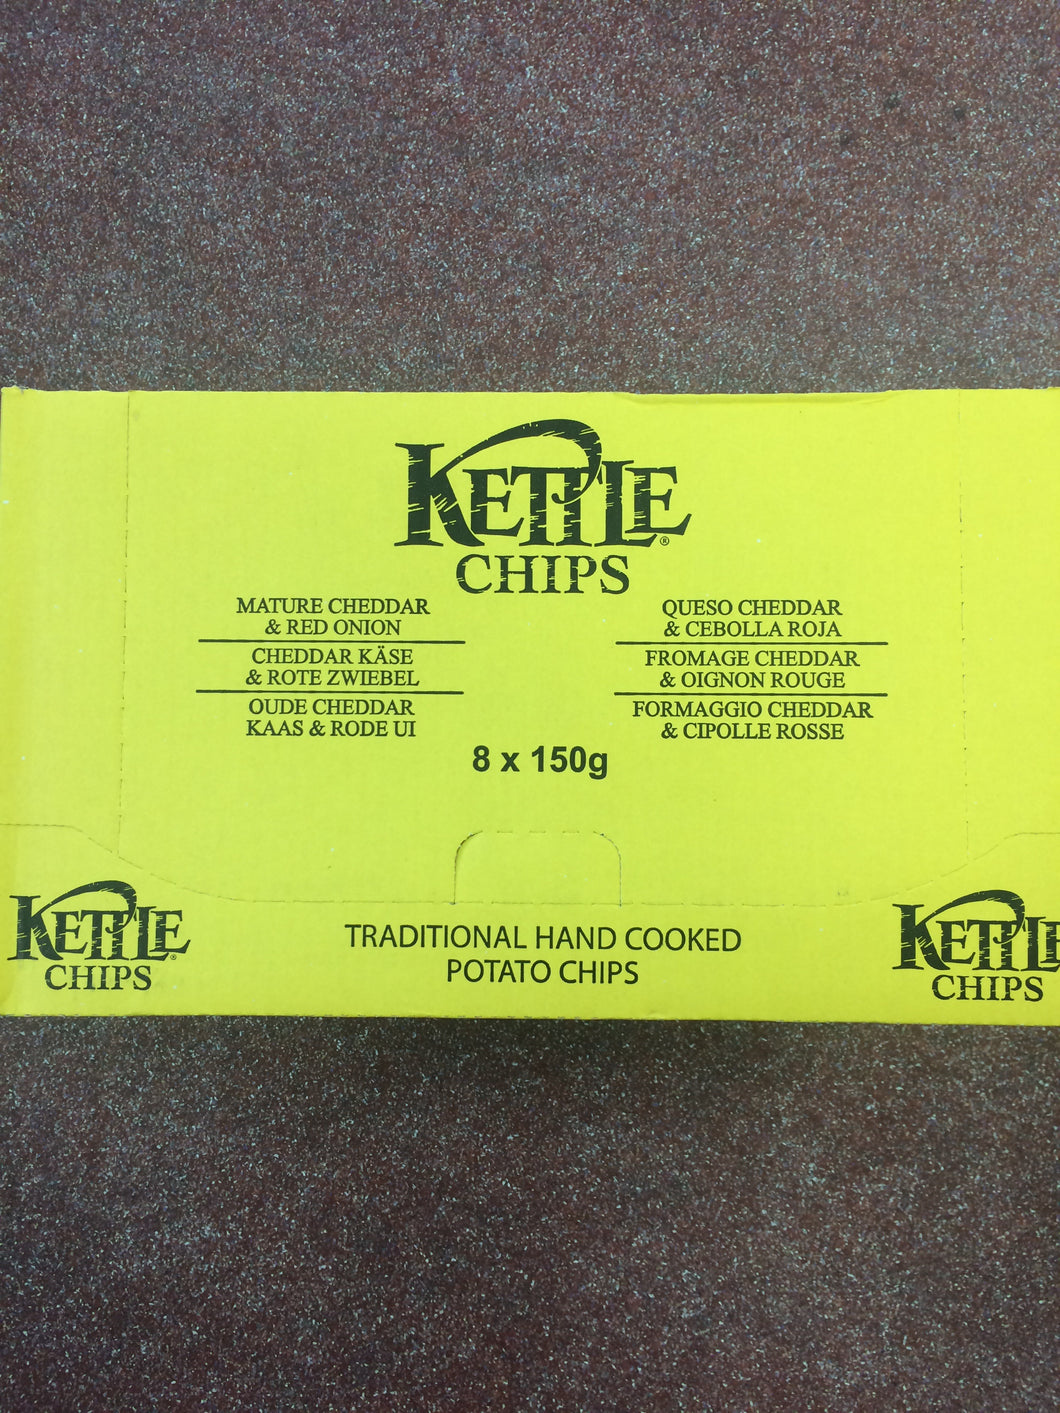 Kettle Chips Mature Cheddar & Red Onion Box of 8x150g Bag